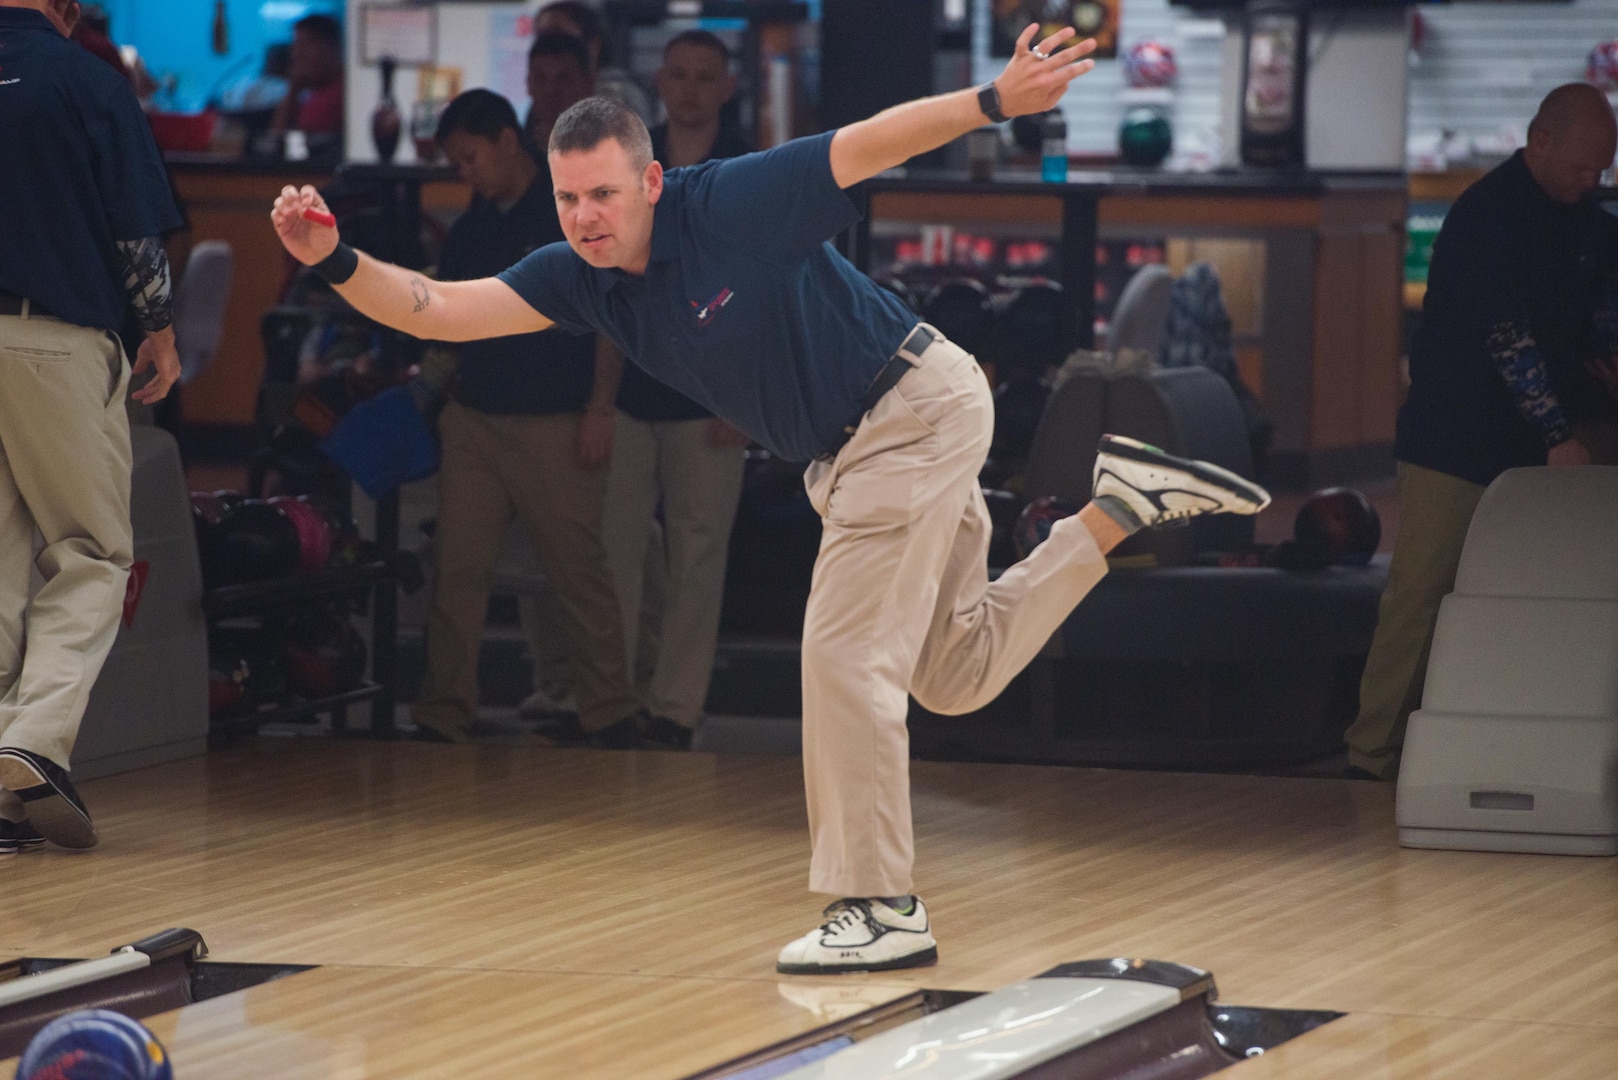 MSgt Joshua Chambliss. First Sergeant, 19th Security Forces Squadron, Little Rock Air Force Base, Arkansas, warms up during the Armed Forces Bowling Championships at Travis Air Force Base, California (U.S. Air Foce Photo by Louis Briscese)